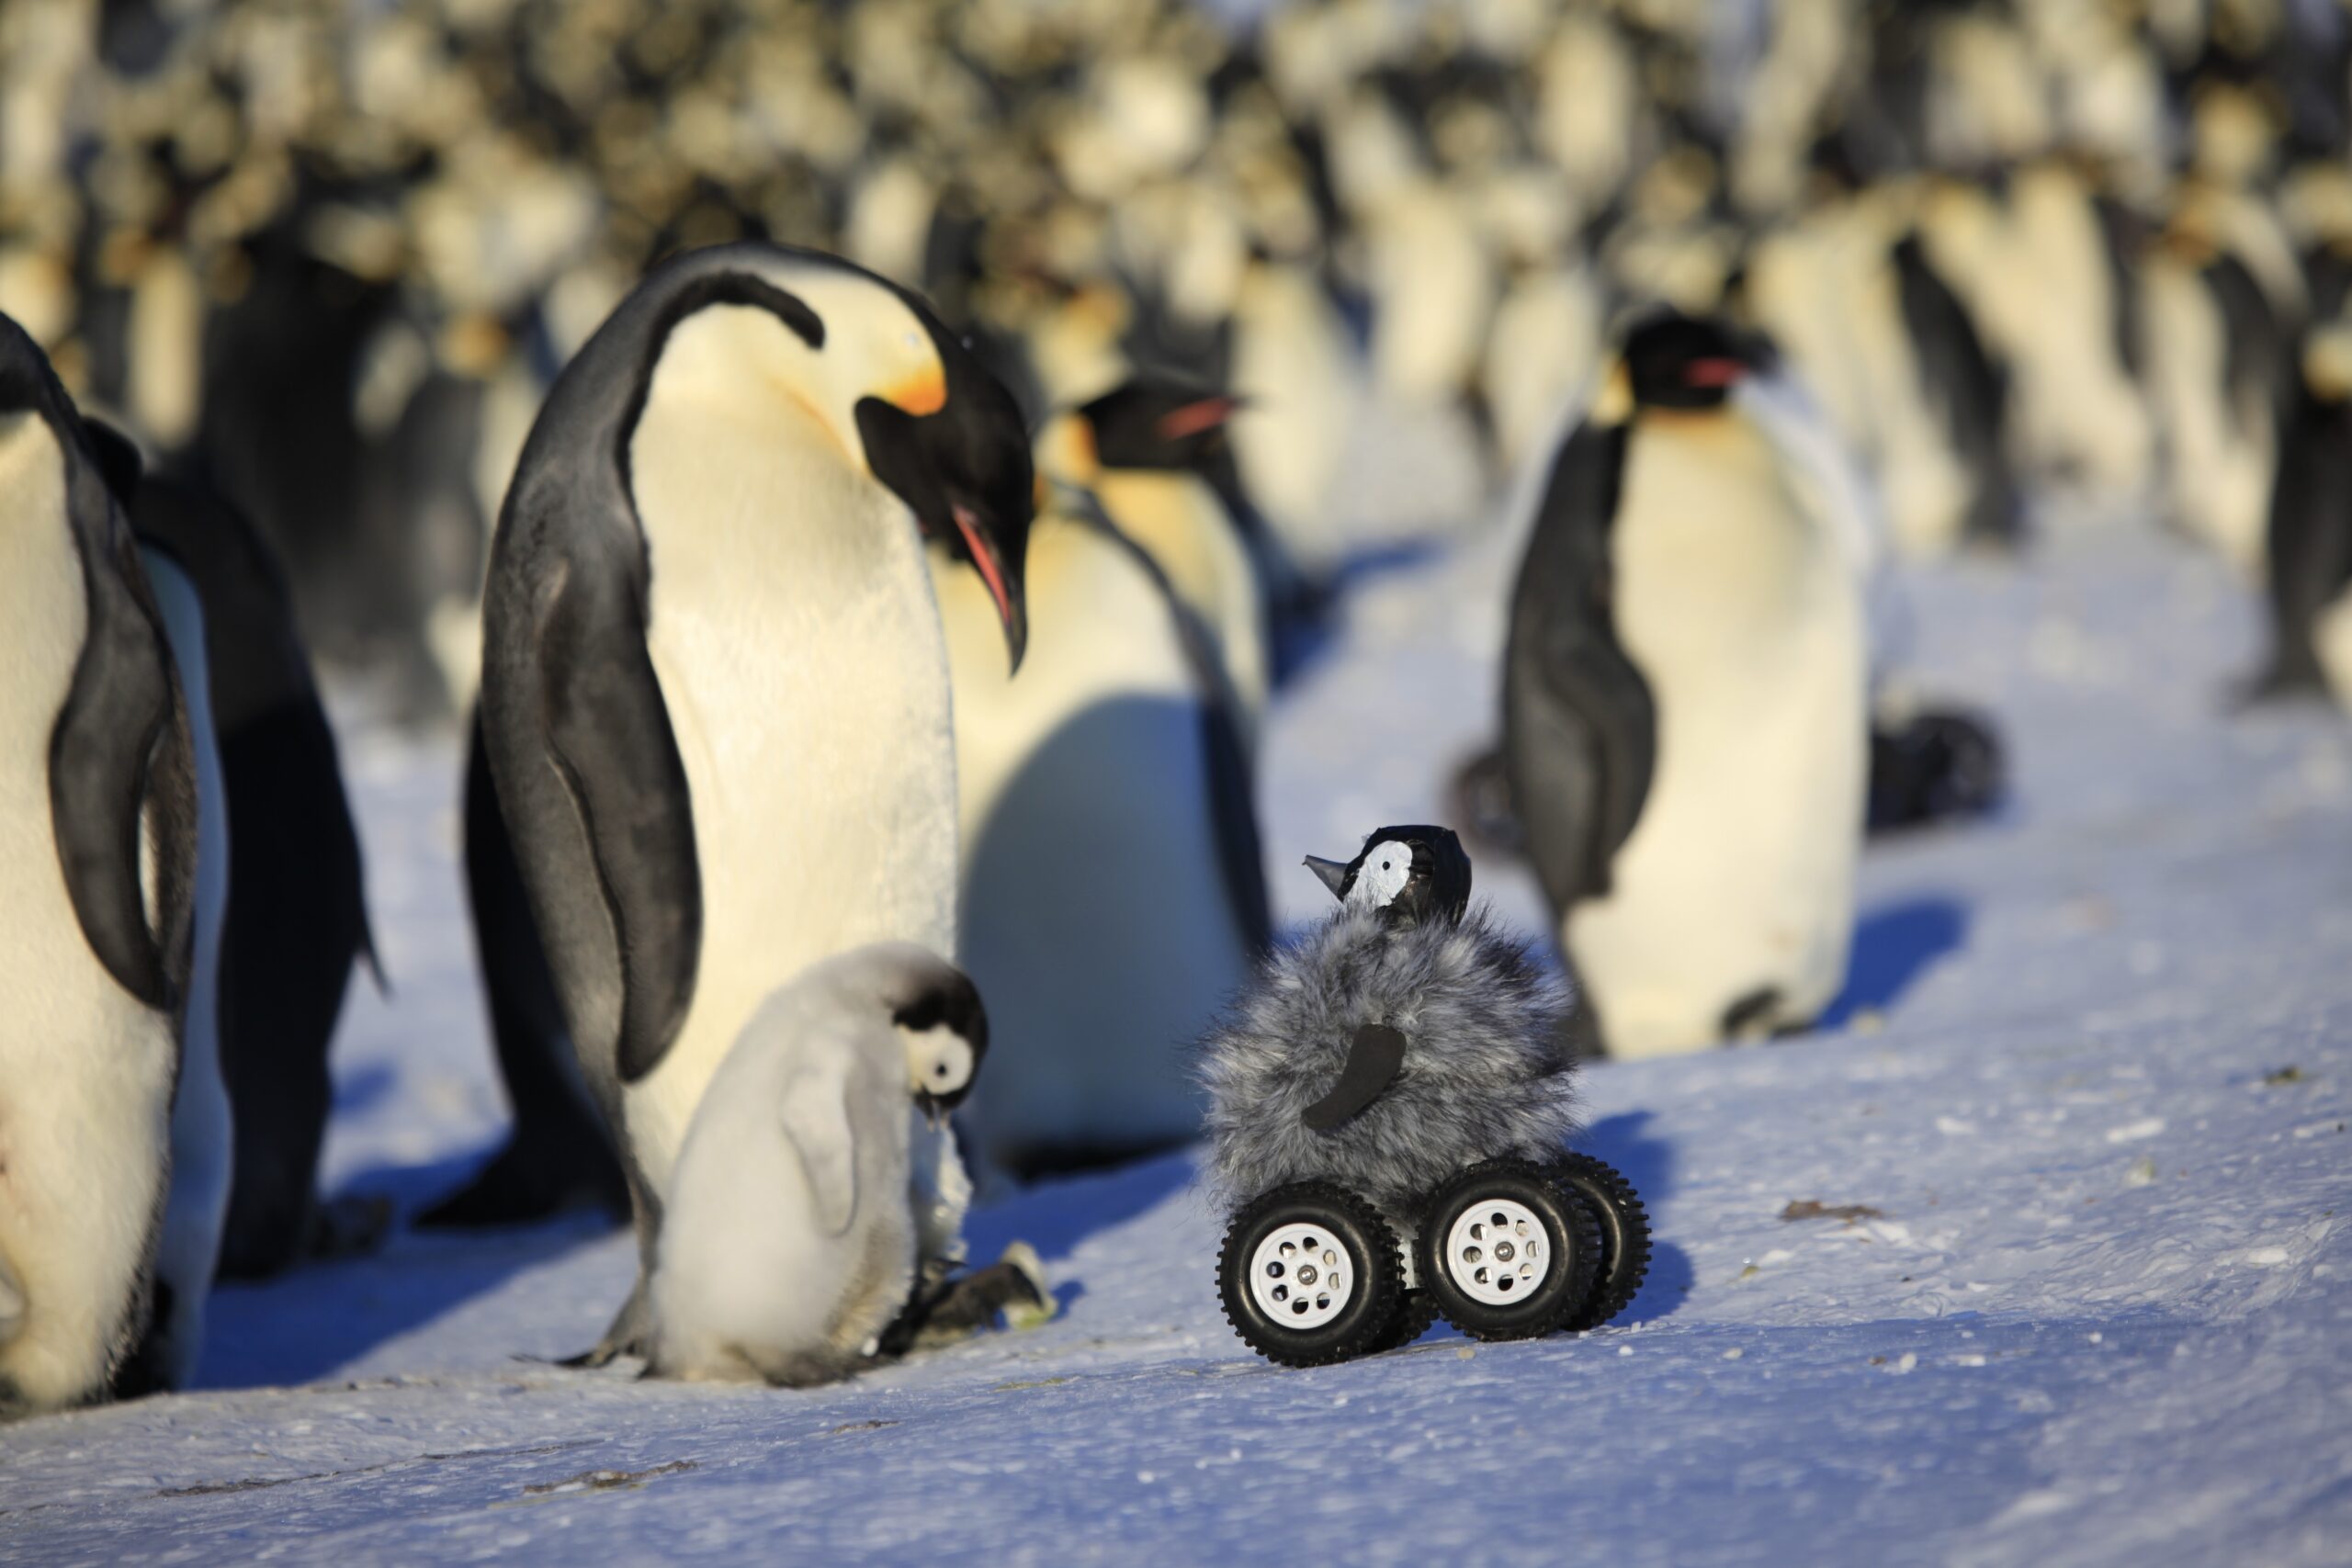 Antarctic Scientists Infiltrate Penguin Huddles With Adorable Remote-Controlled Car